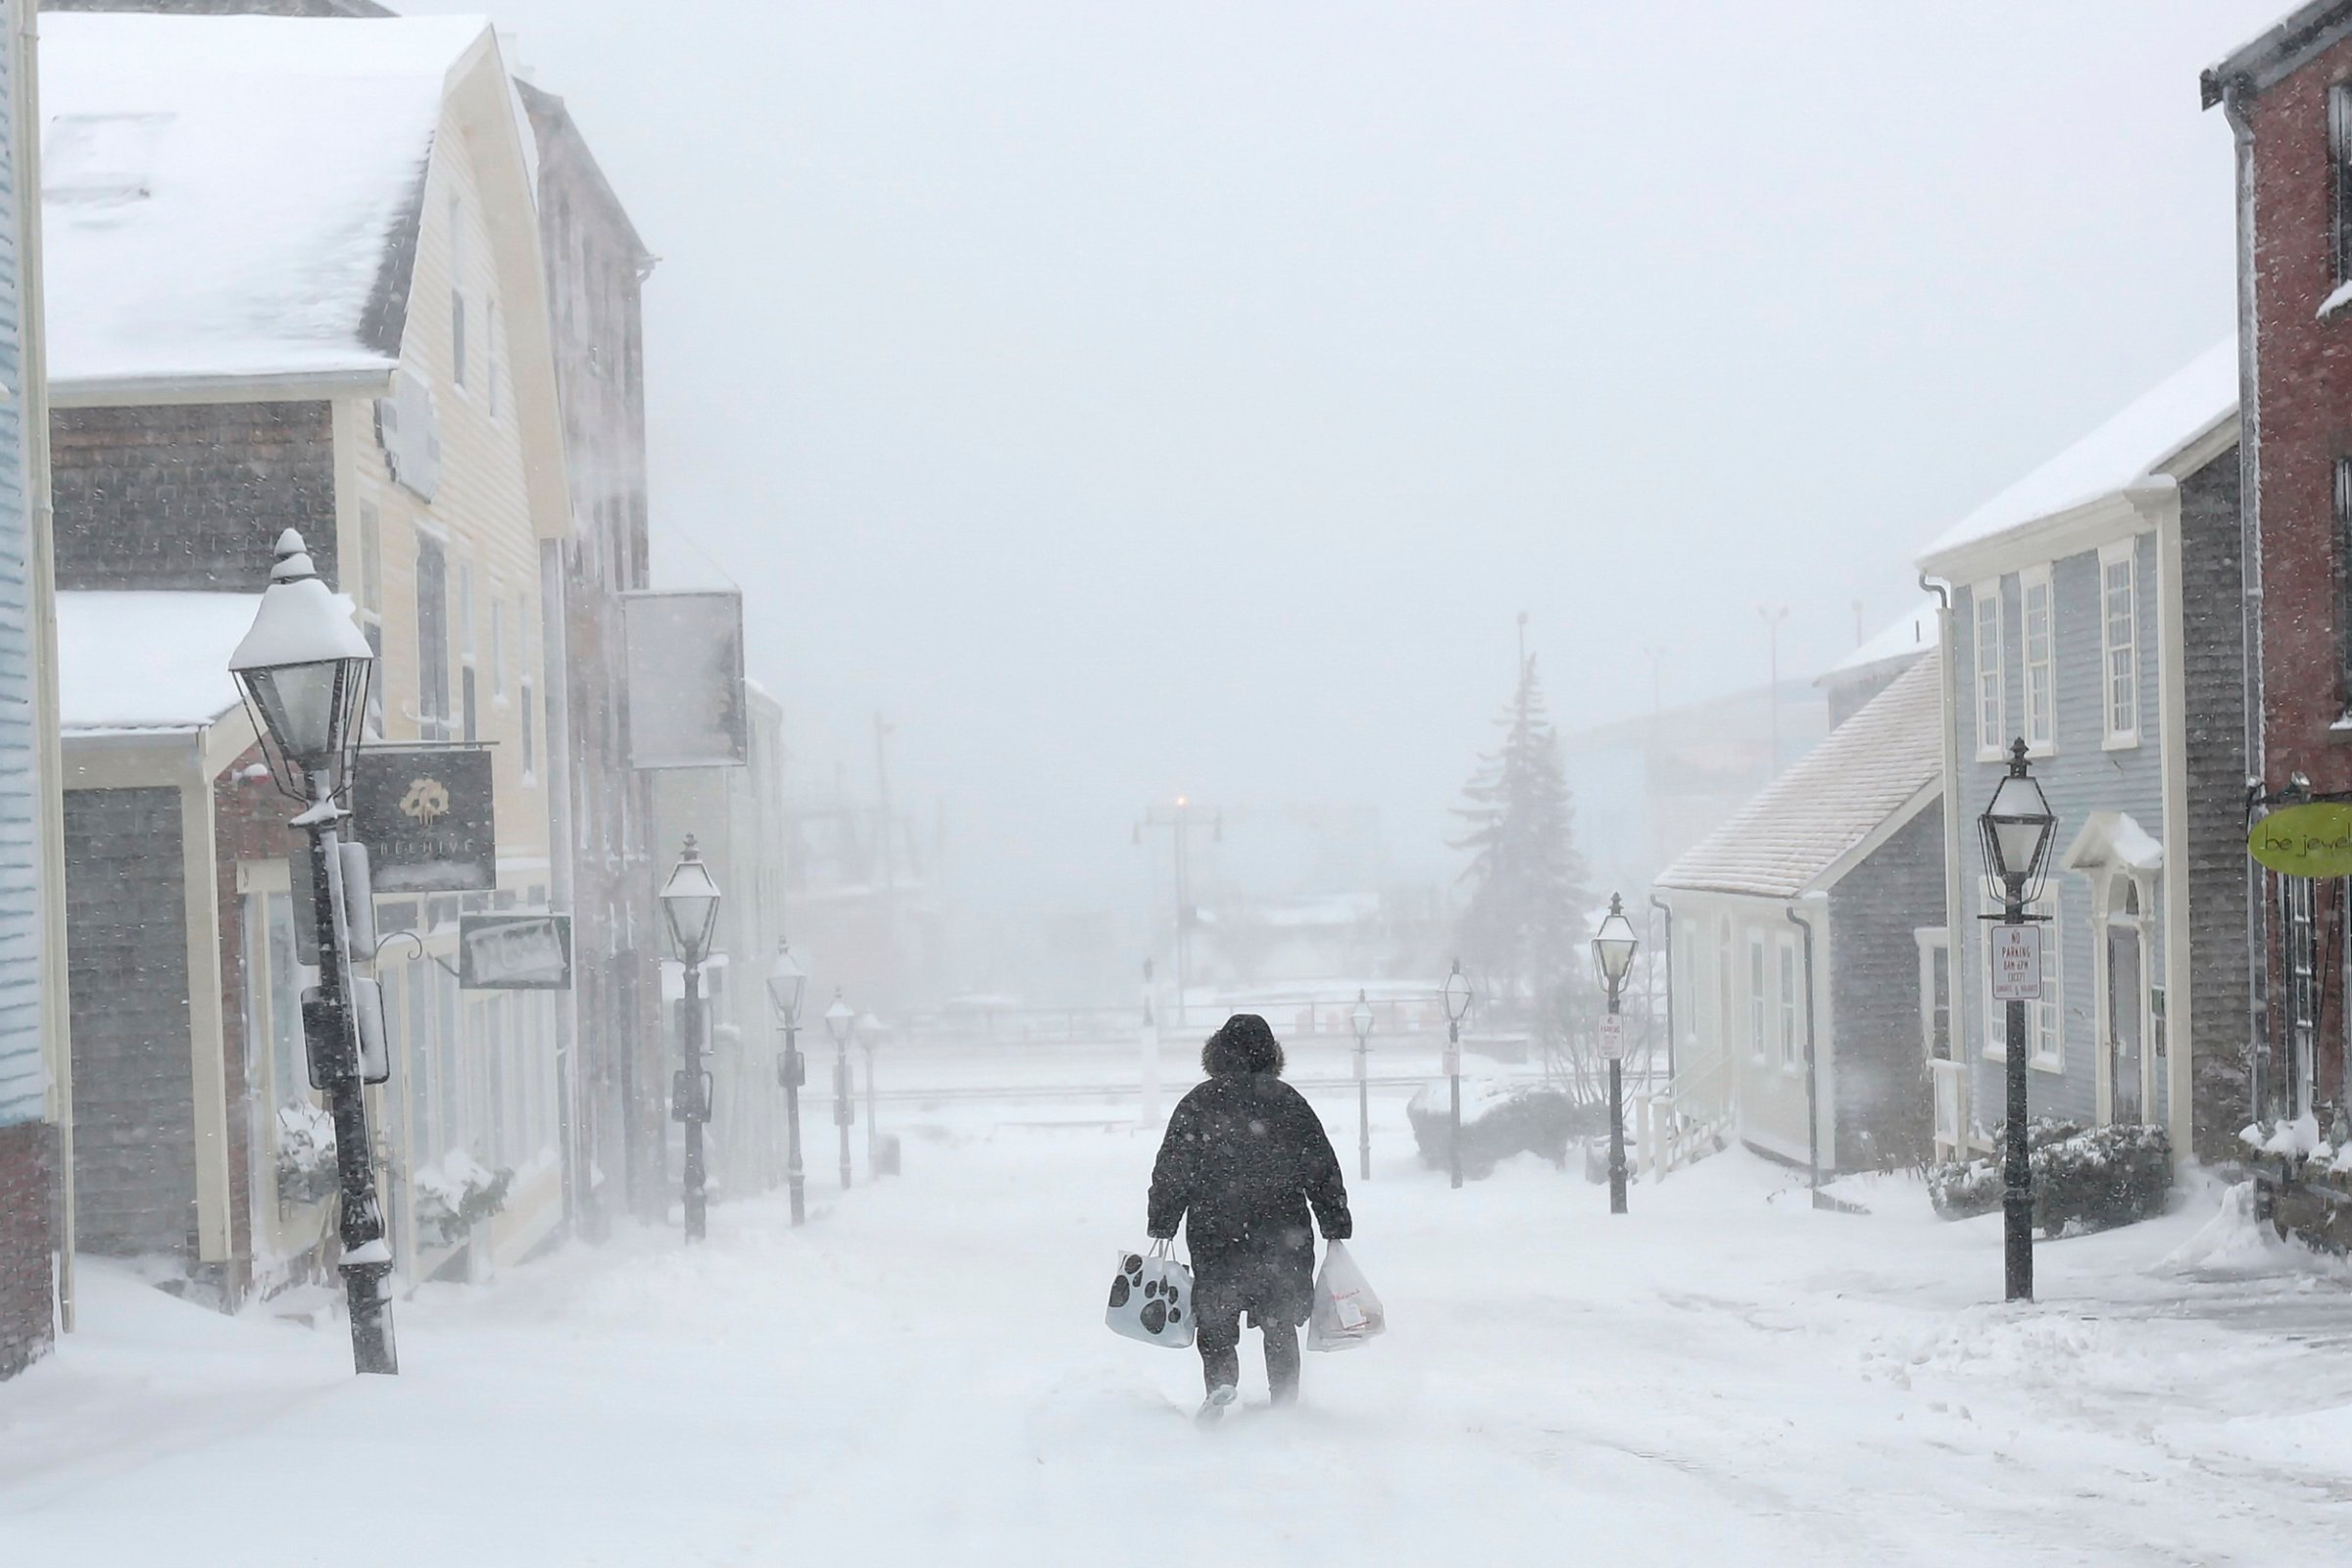 A woman walks down the street during a snowstorm in New Bedford, Mass., on Feb. 8, 2016.